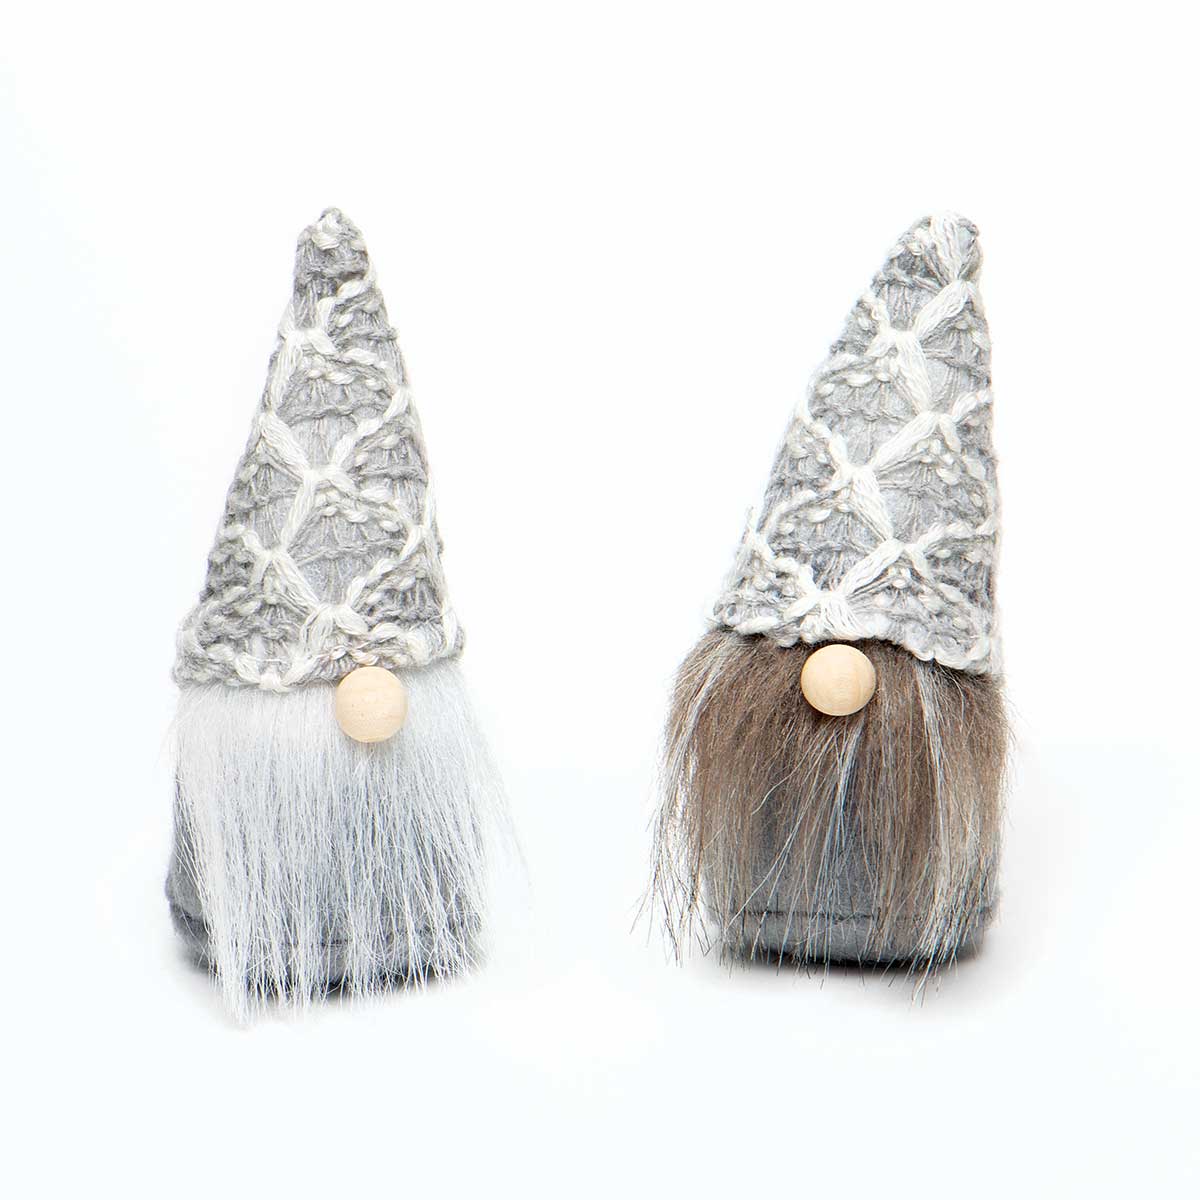 WEE GNOME ORNAMENT GREY/WHITE WITH KNIT HAT, WOOD